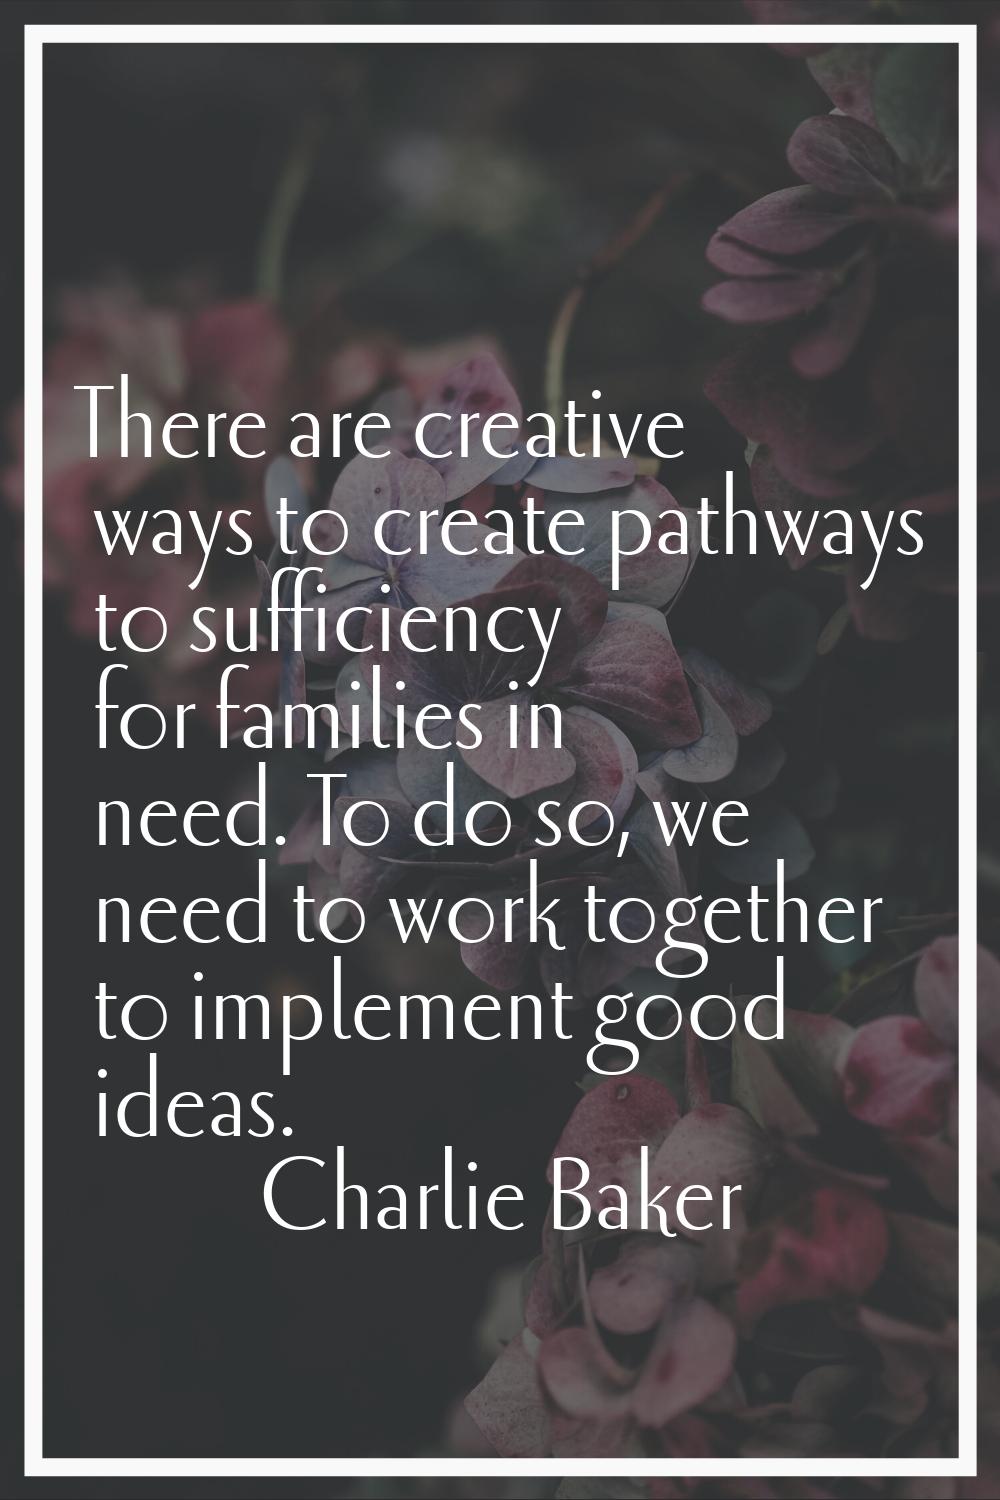 There are creative ways to create pathways to sufficiency for families in need. To do so, we need t